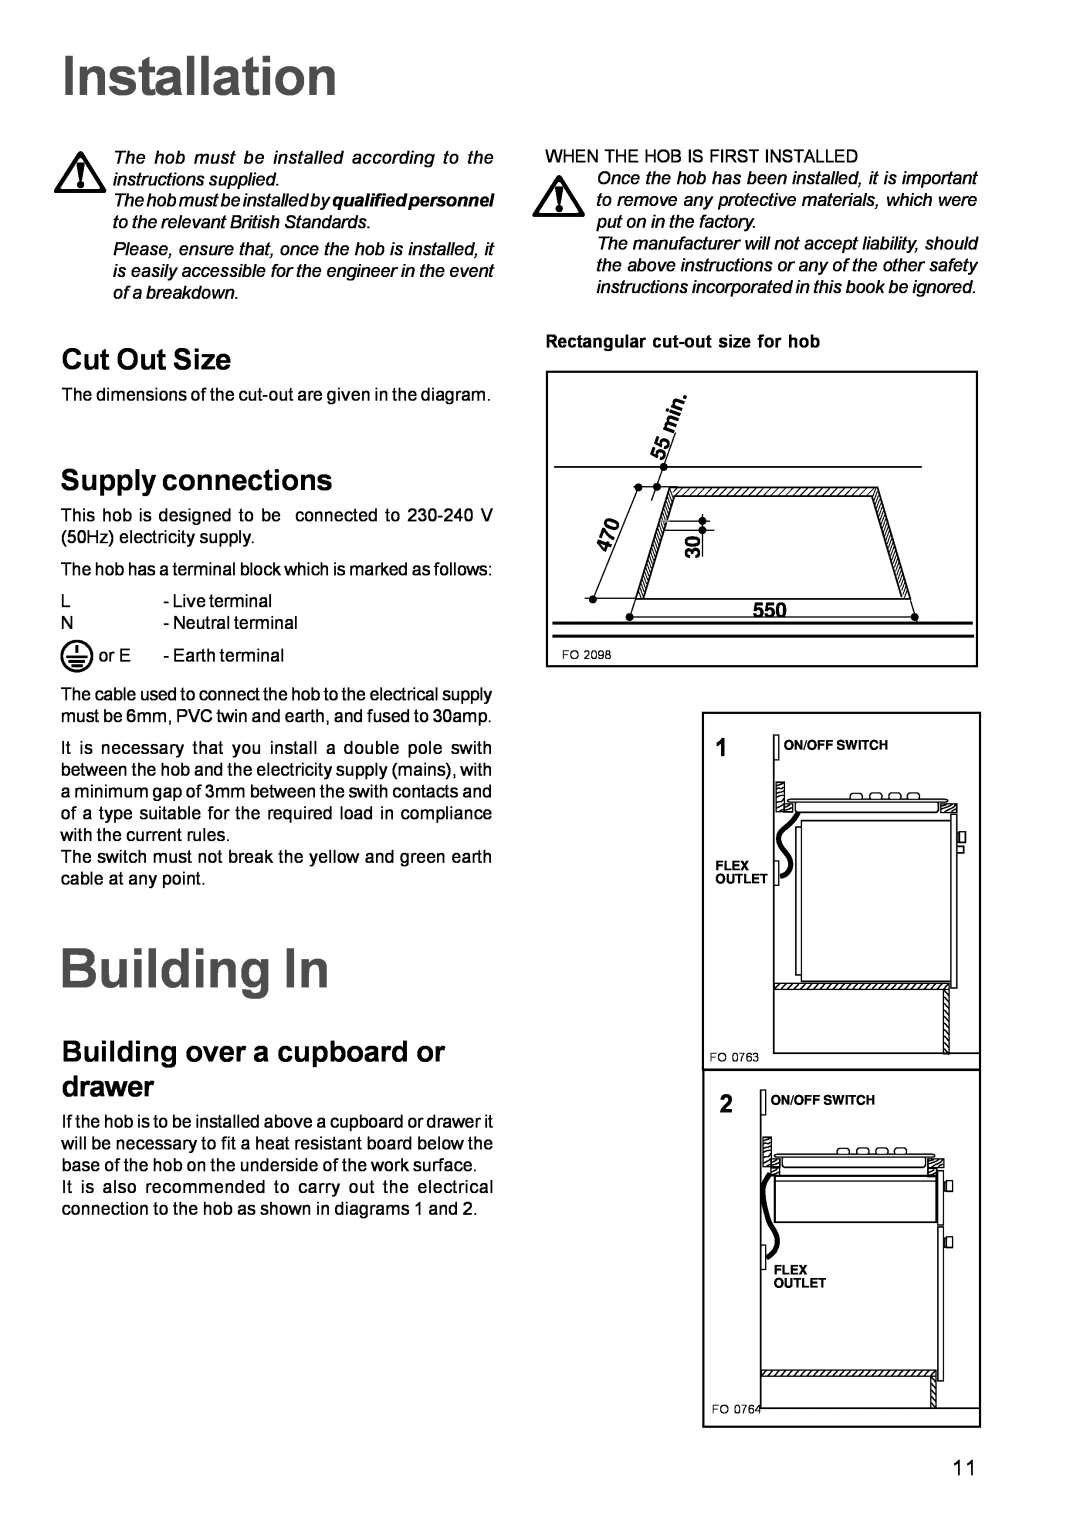 Zanussi ZEL 63 manual Installation, Building In, Cut Out Size, Supply connections, Building over a cupboard or drawer 